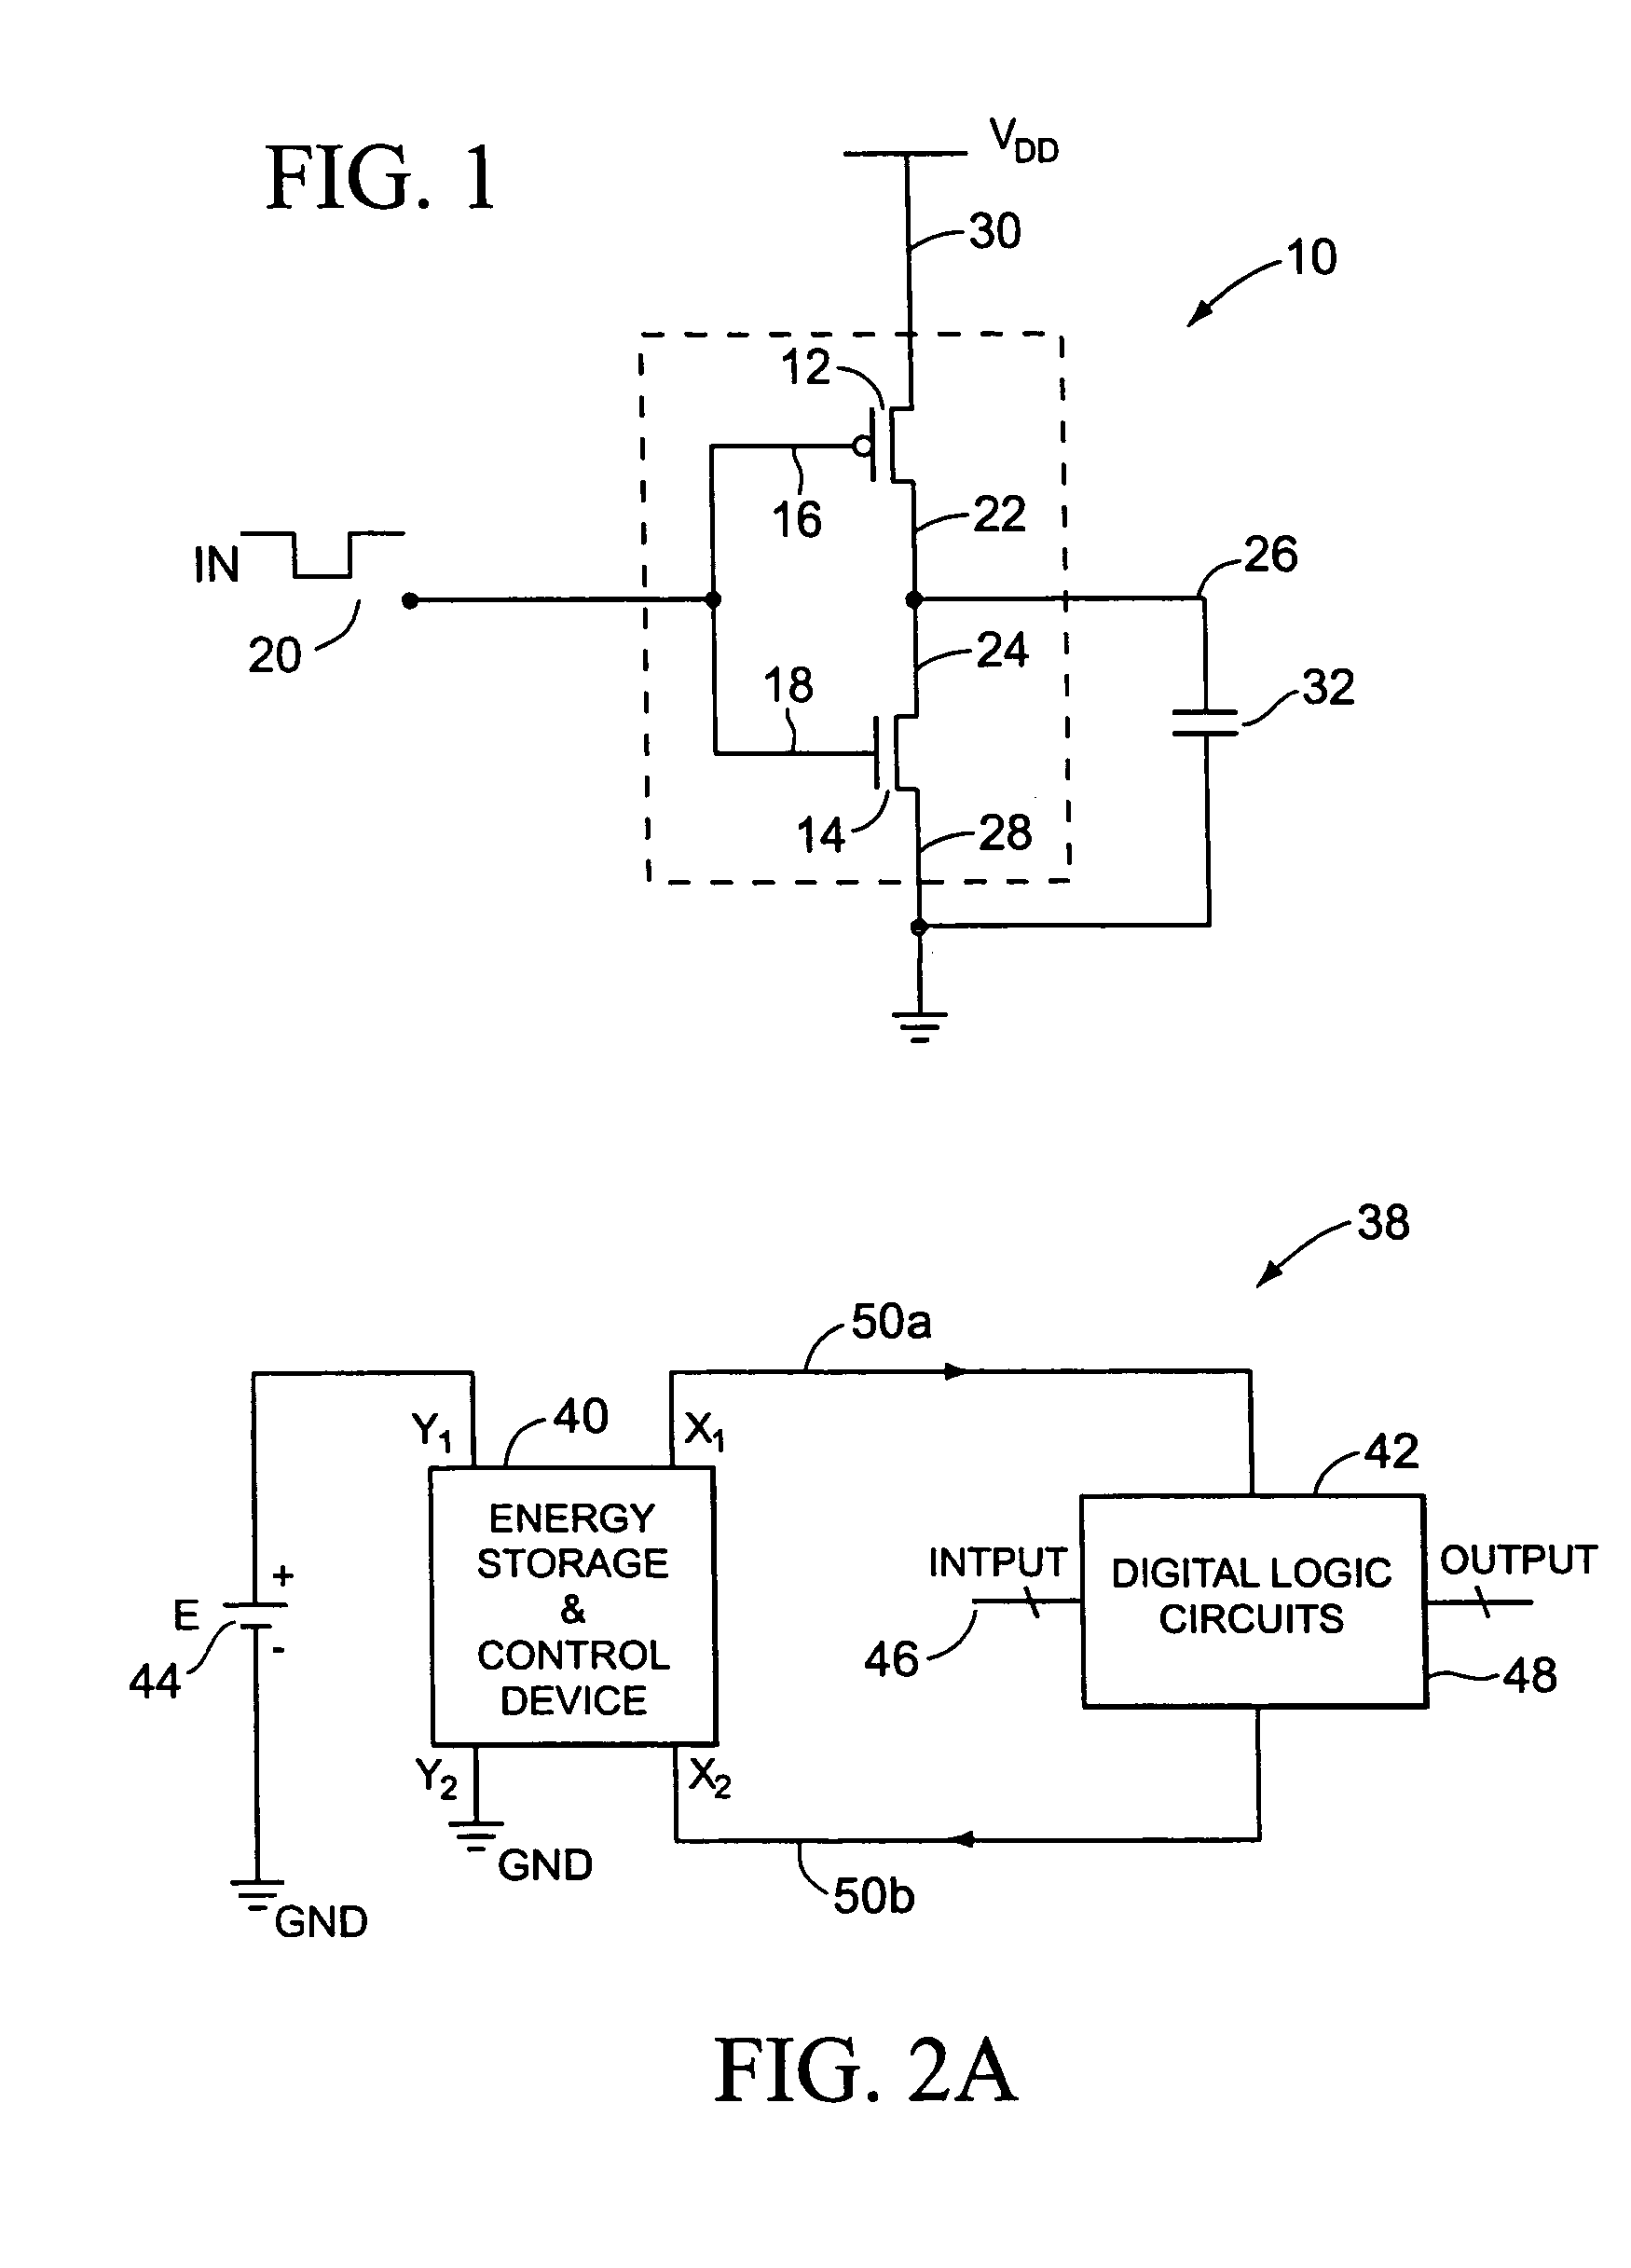 Resonant logic and the implementation of low power digital integrated circuits